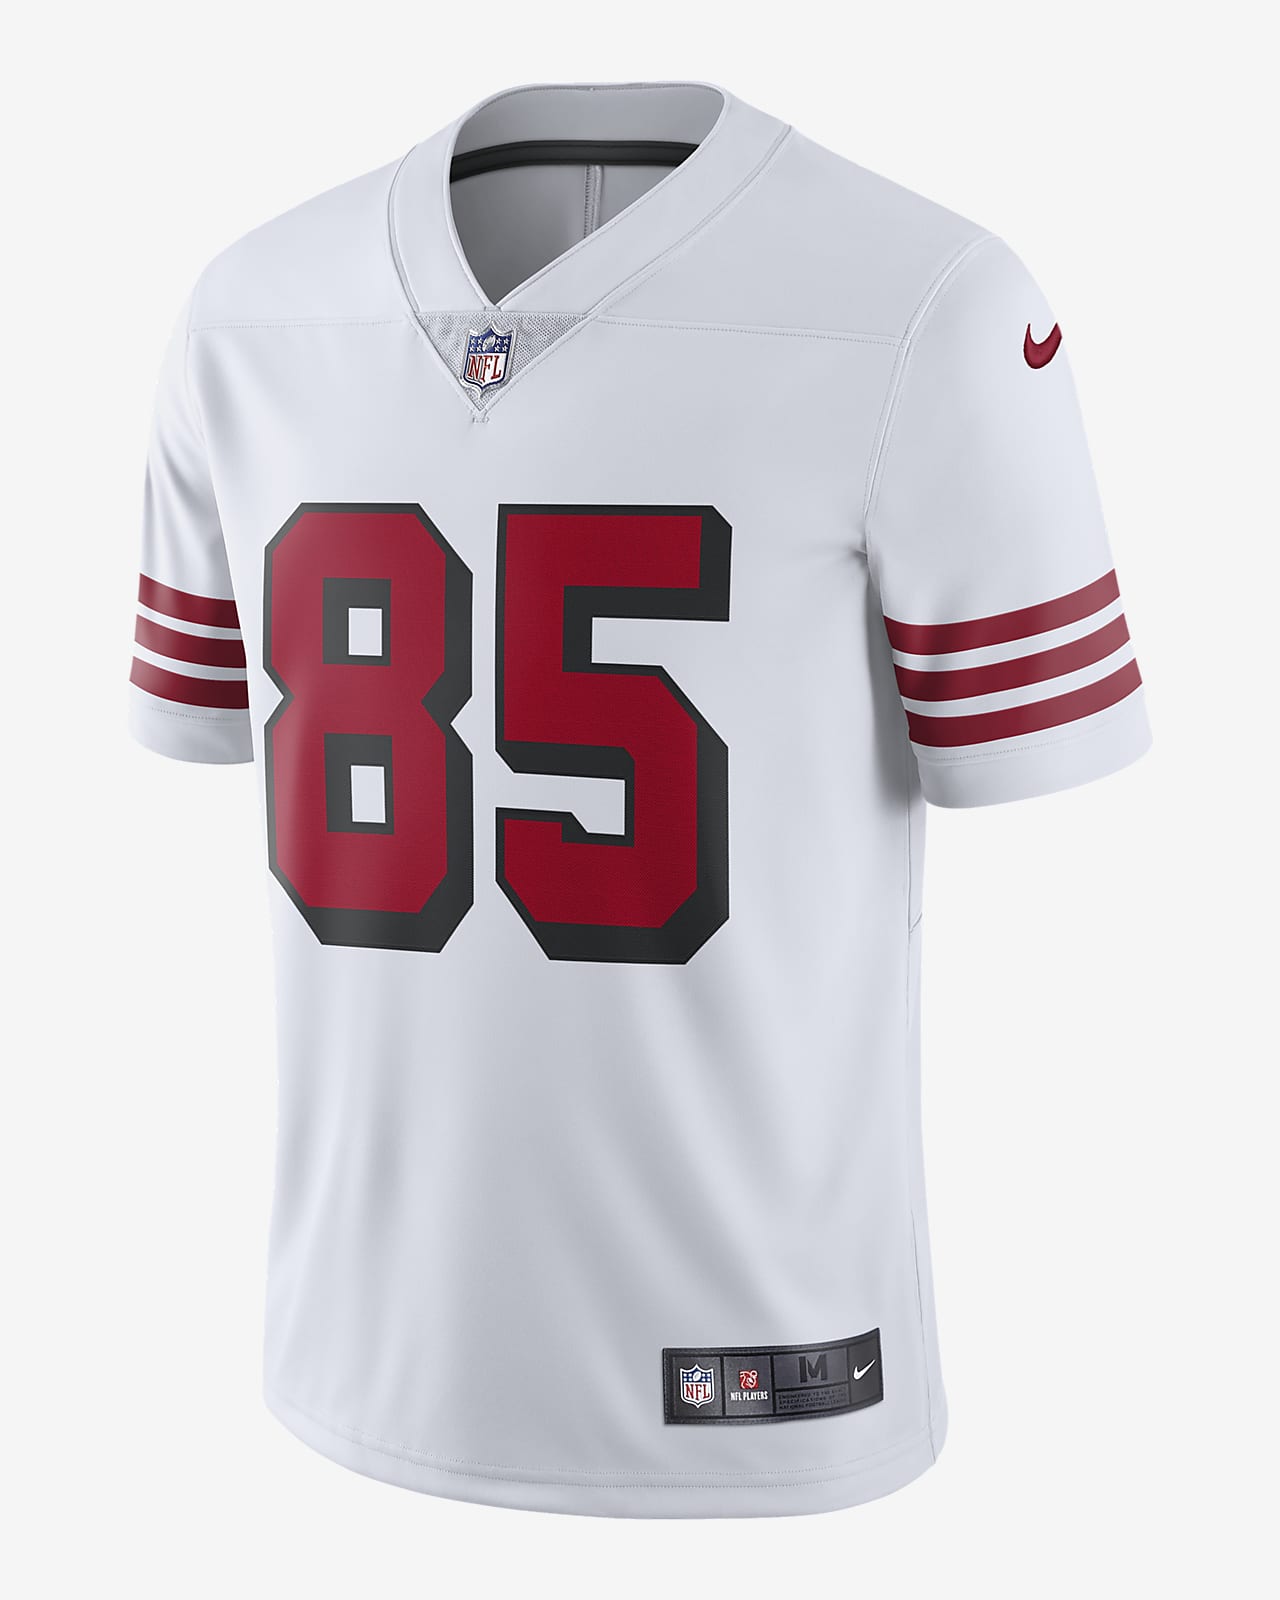 george kittle jersey authentic